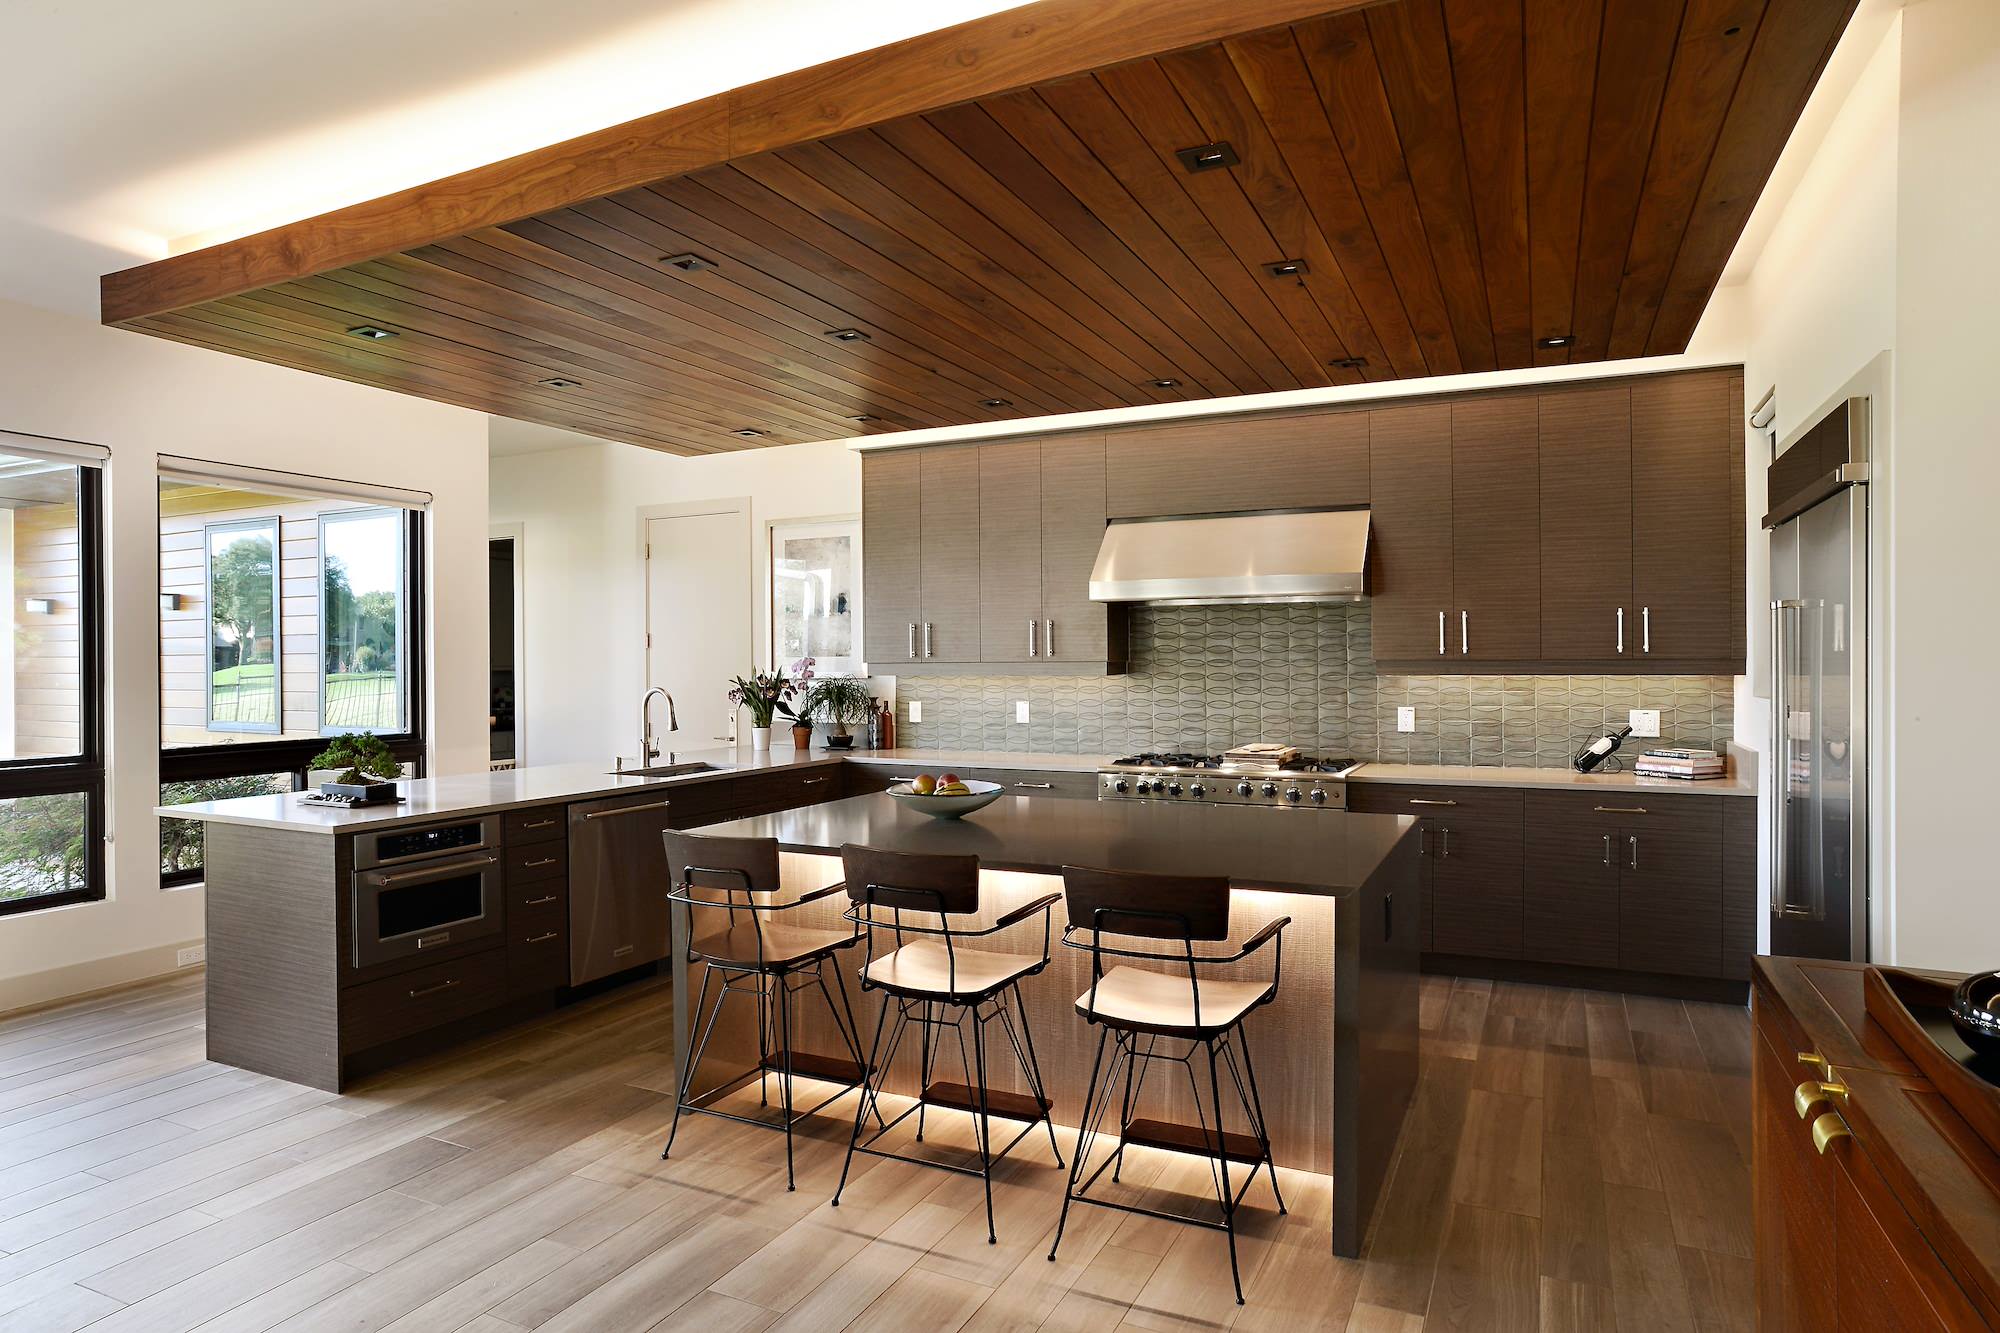 75 Beautiful Kitchen With Brown Cabinets Pictures Ideas January 2022 Houzz